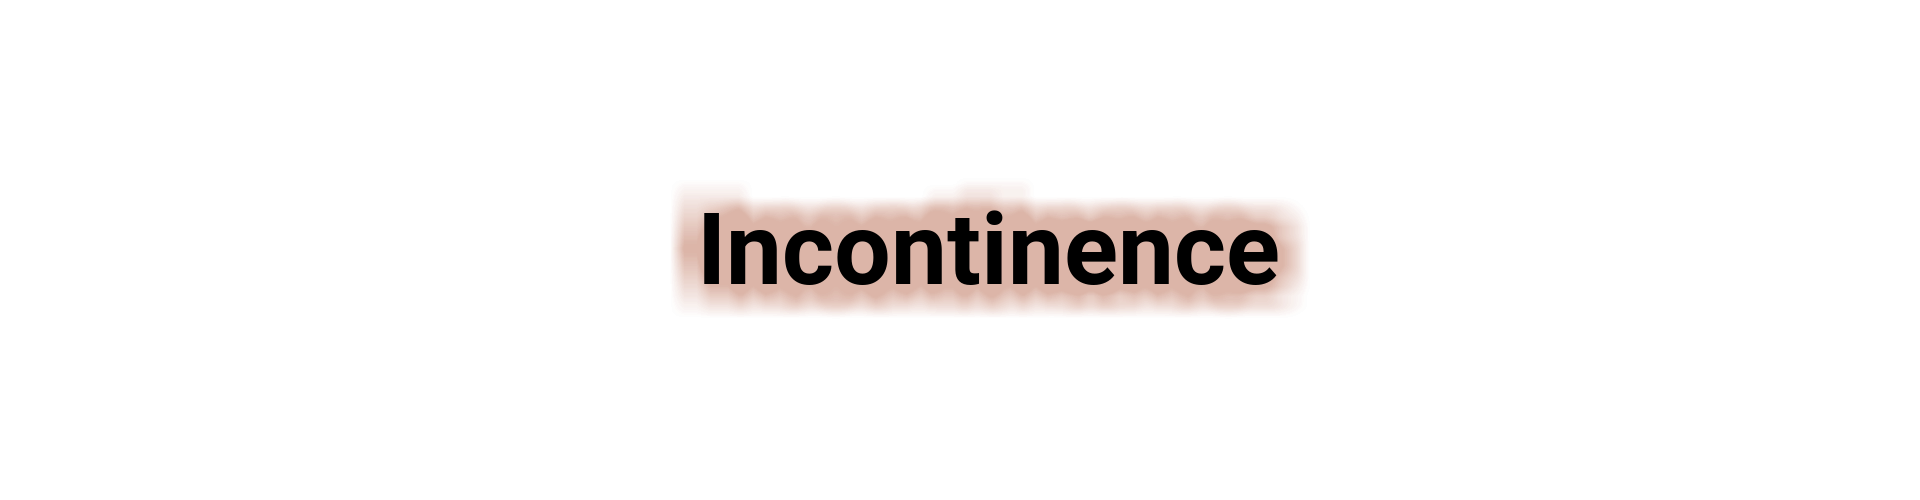 Incontinence.png